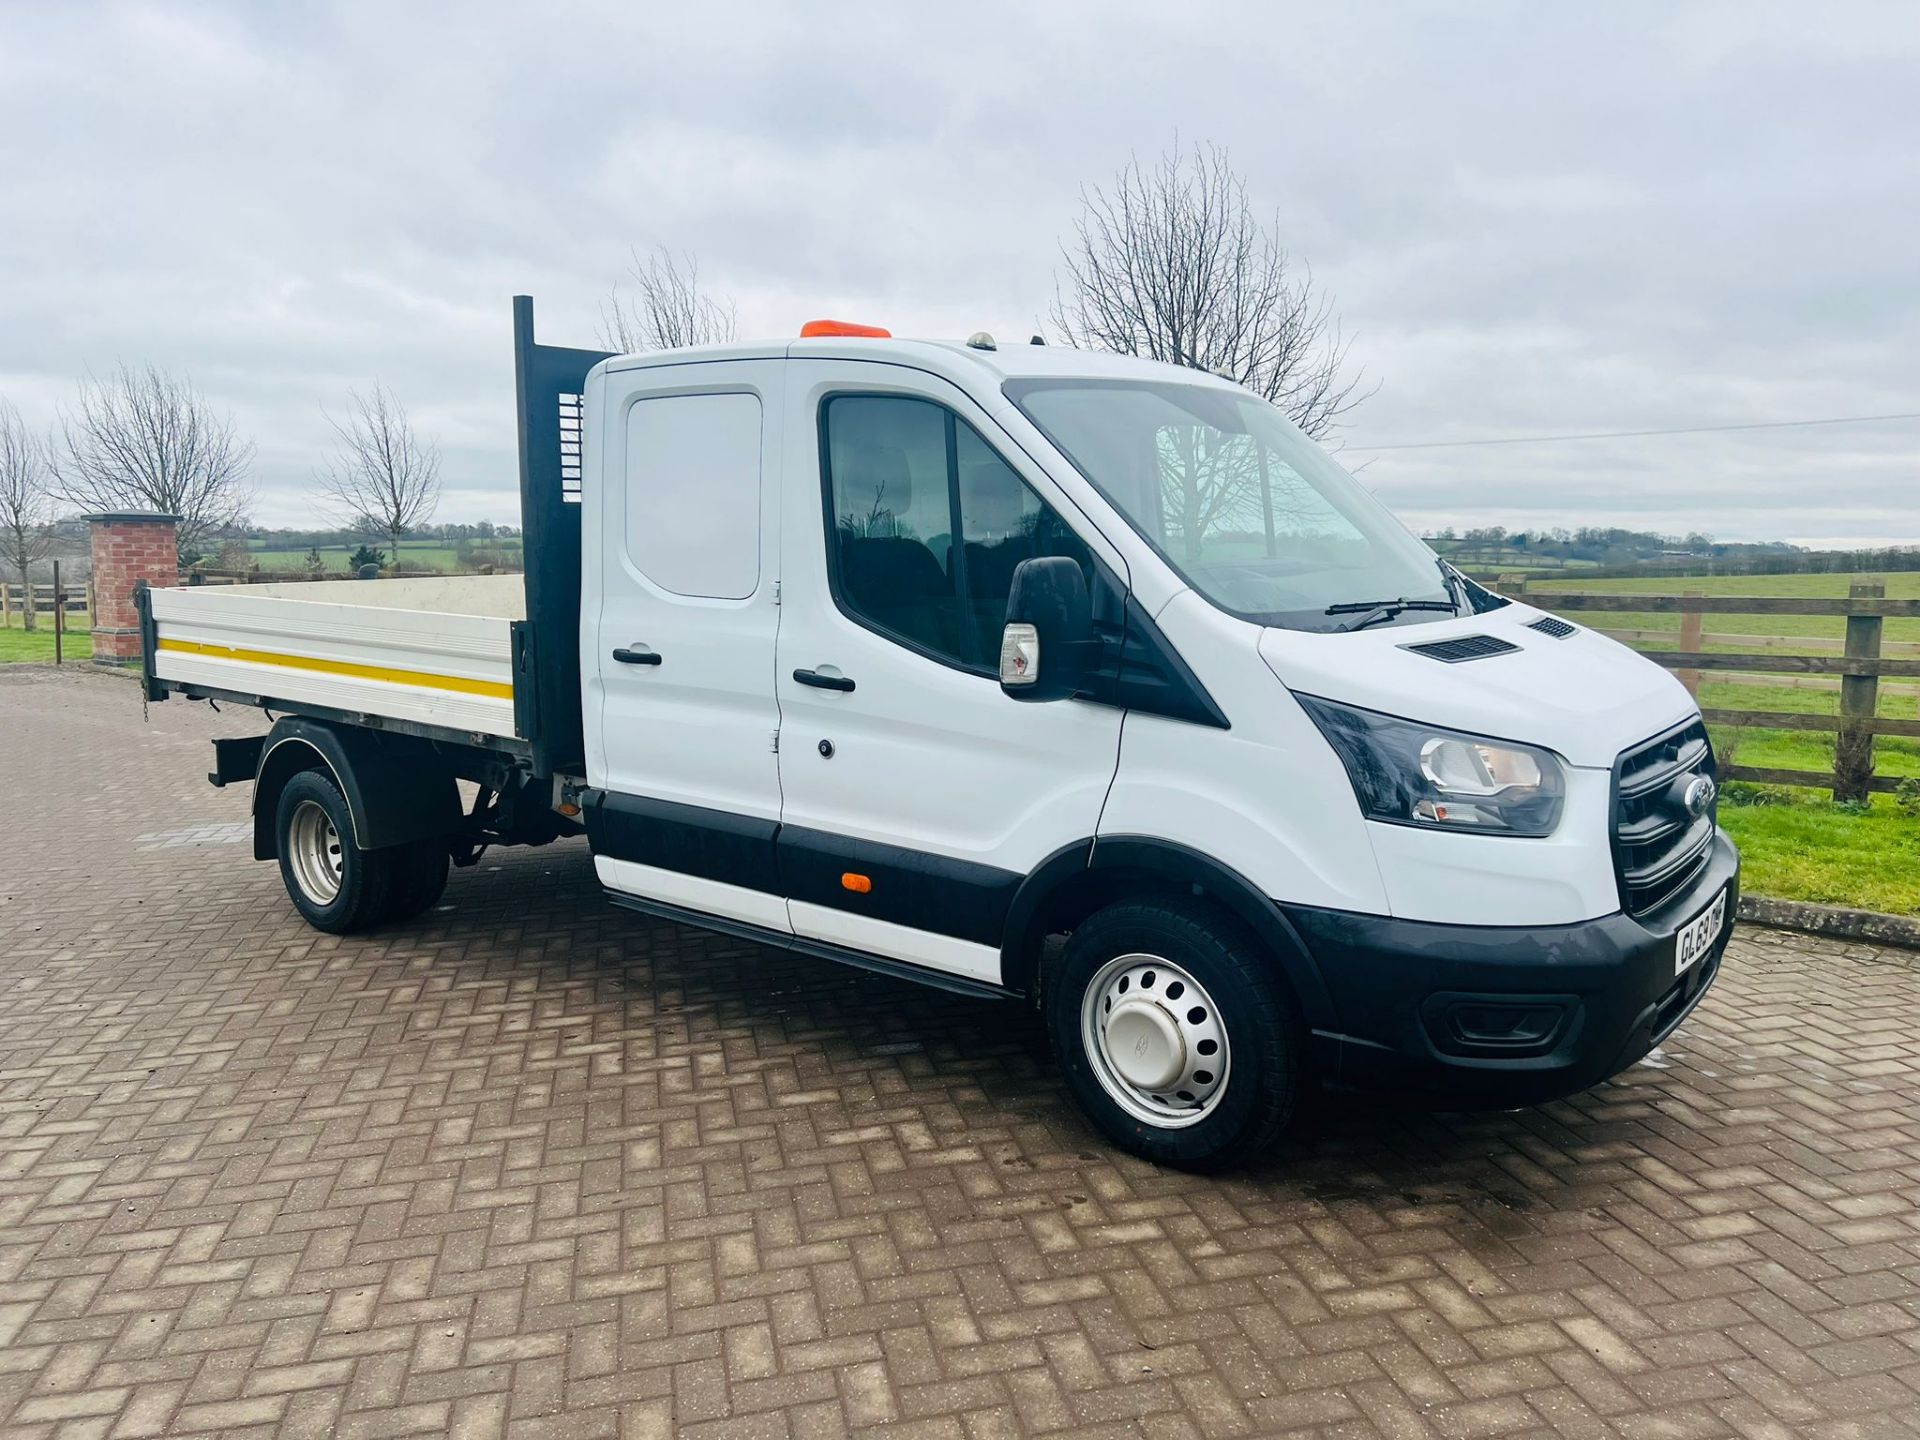 Ford Transit 350 L3 H1 2.0 TDCI Double Cab Tipper 2020 Year - Euro 6 - 1 Owner-SH Print - 57K Only - Image 2 of 20